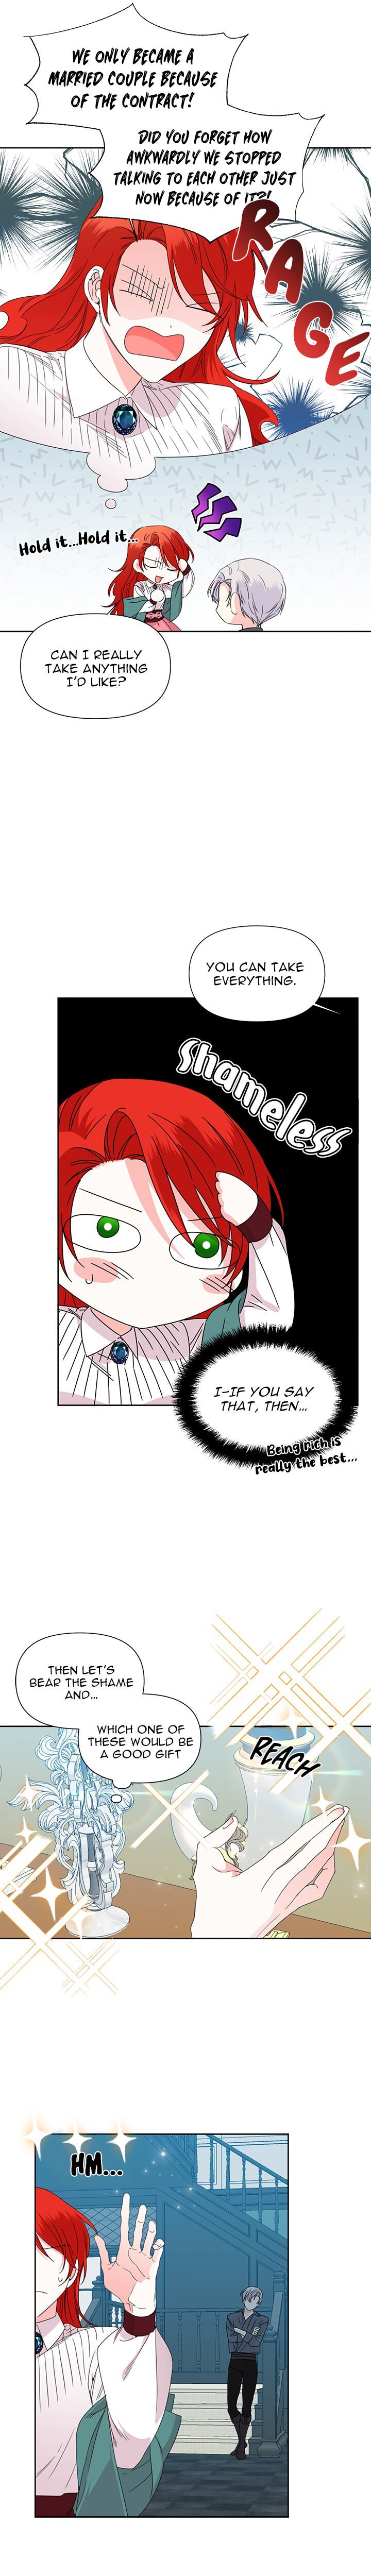 happy-ending-for-the-time-limited-villainess-chap-37-3